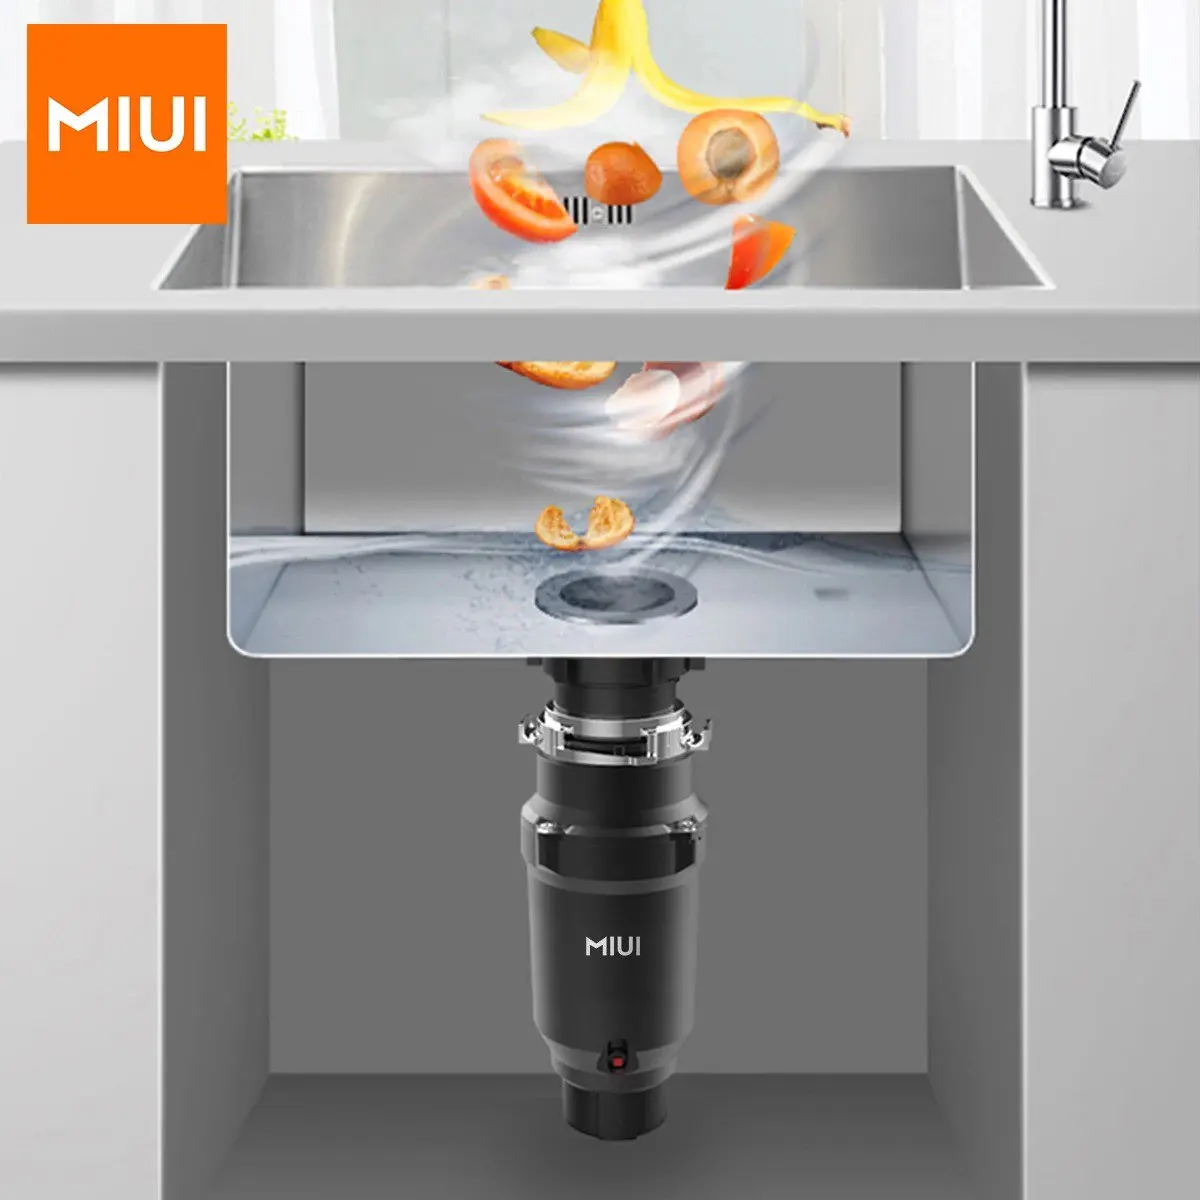 MIUI Continuous Feed Garbage Disposal with Sound Reduction,1/2 HP Food Waste Disposer with Stainless Steel Grinding System photo review